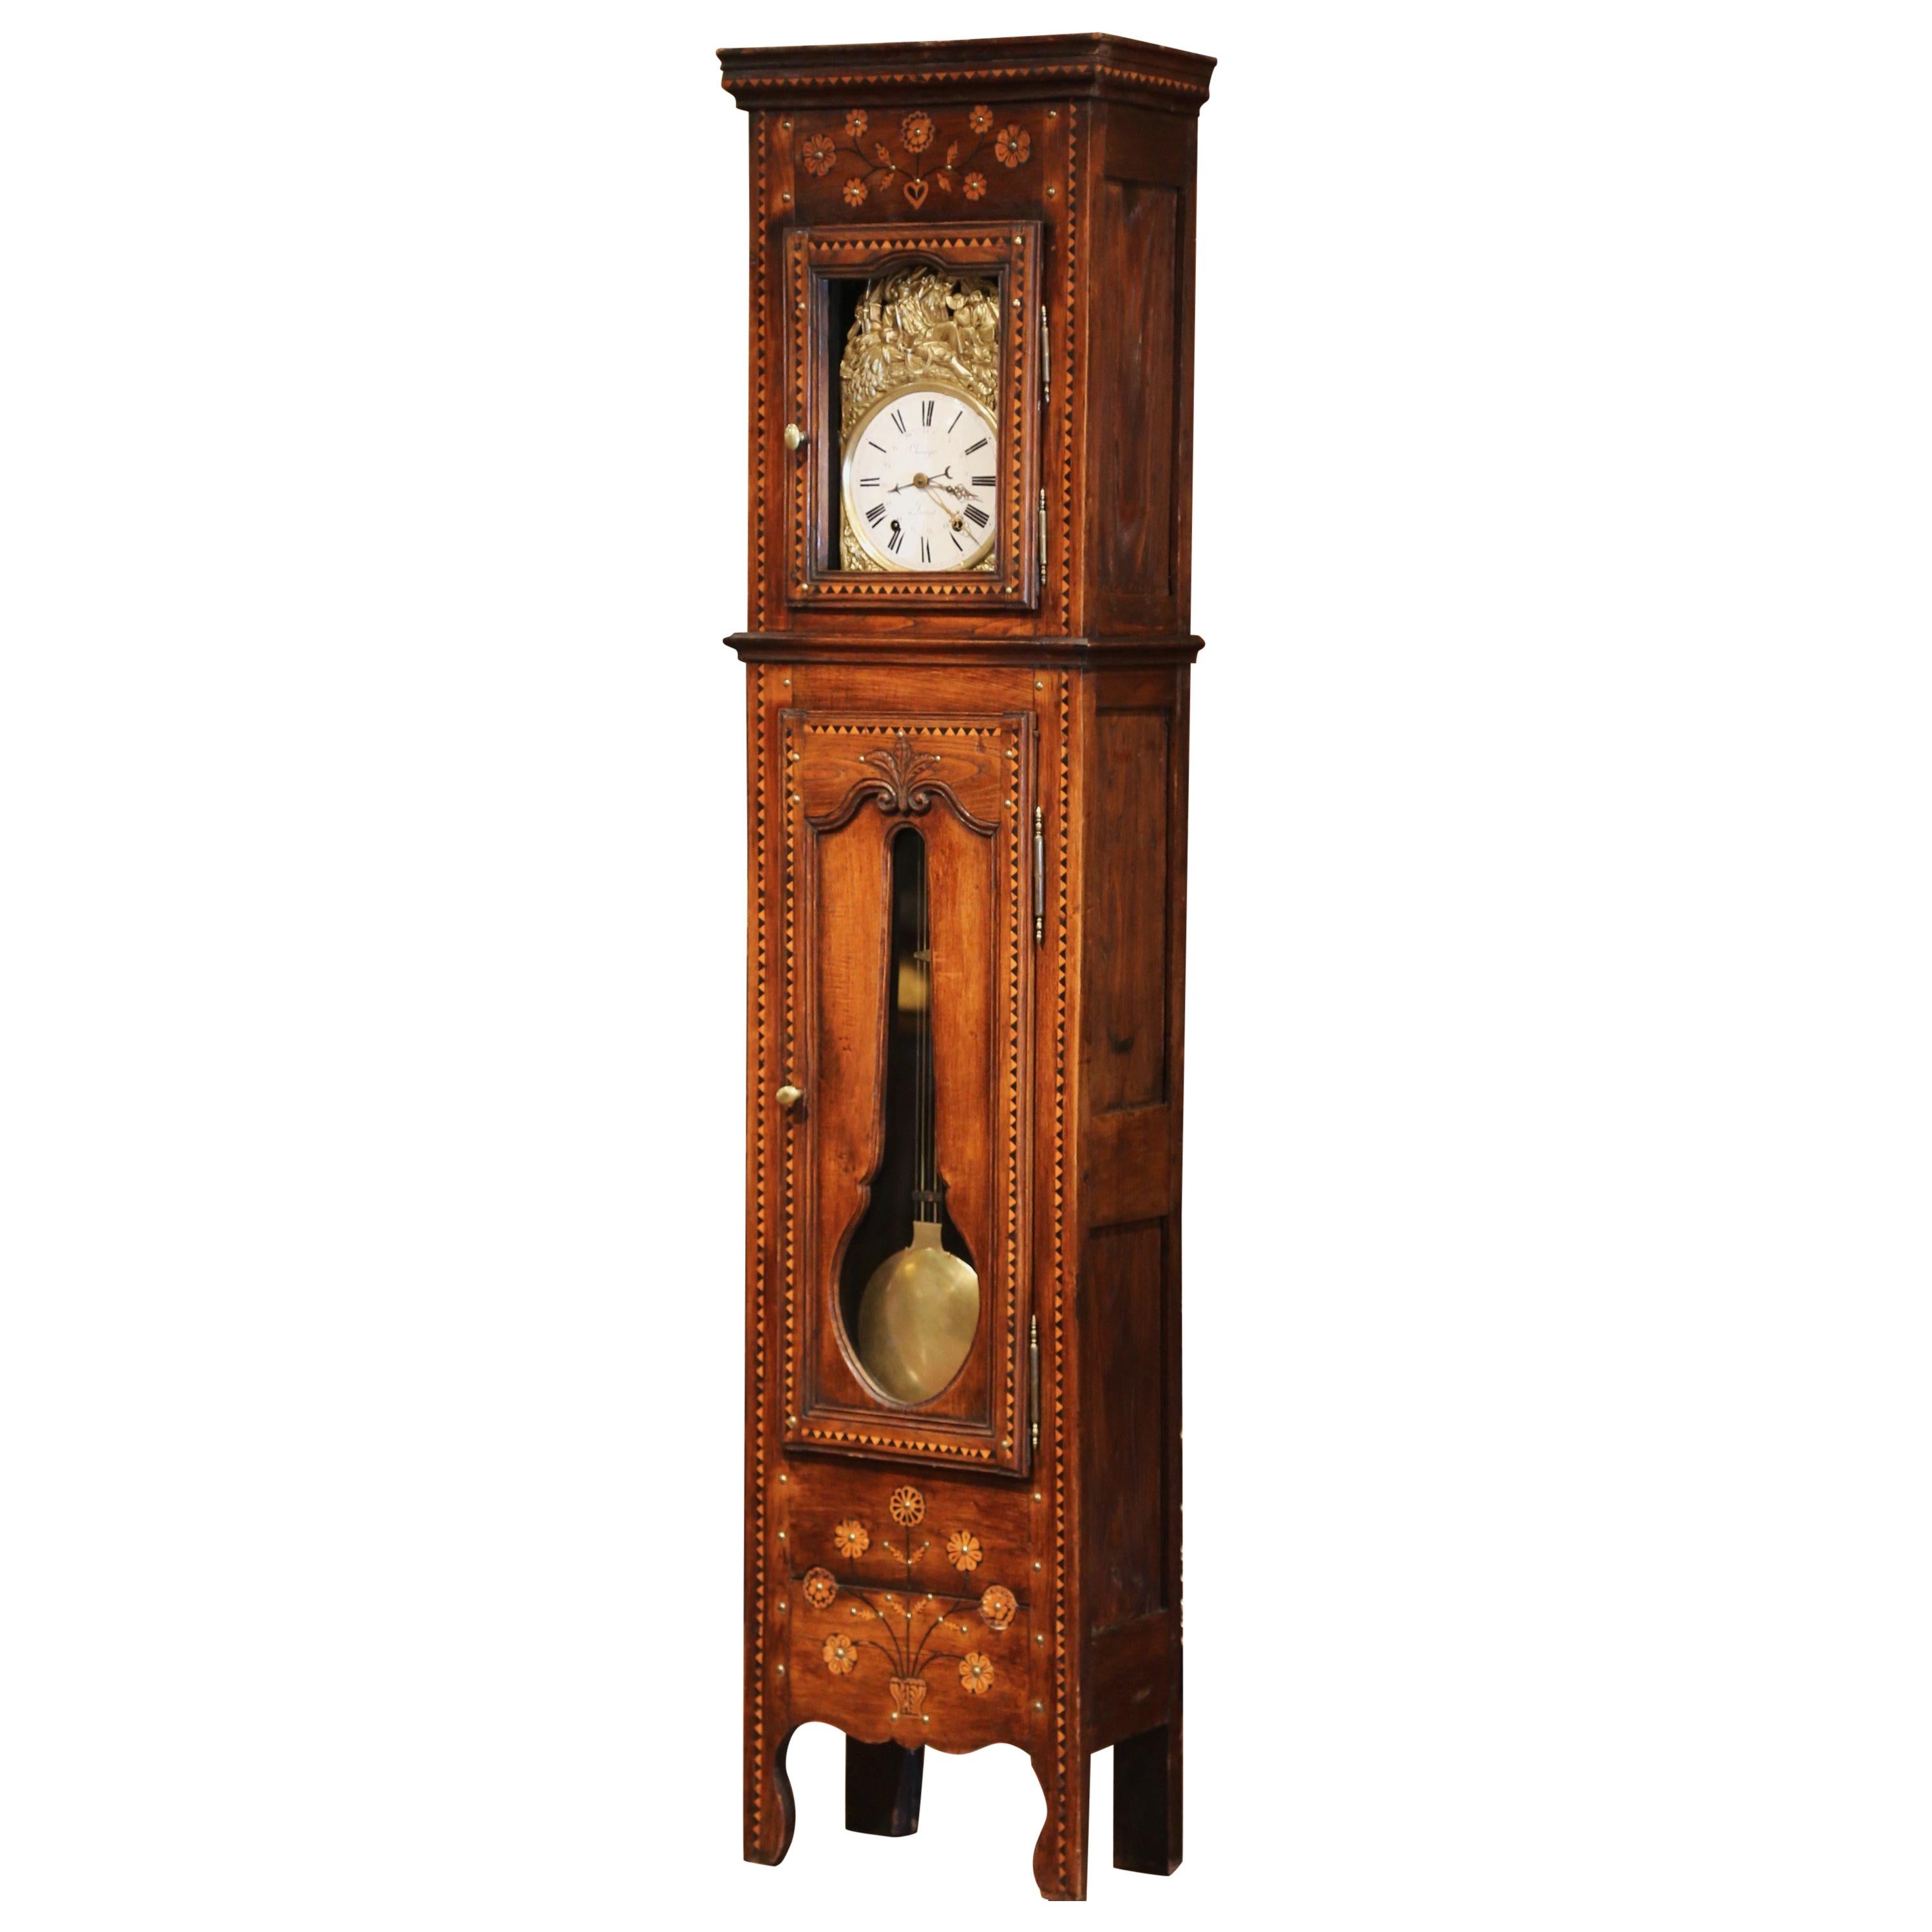 18th Century French Carved and Inlay Chestnut Grandfather Clock from Brittany